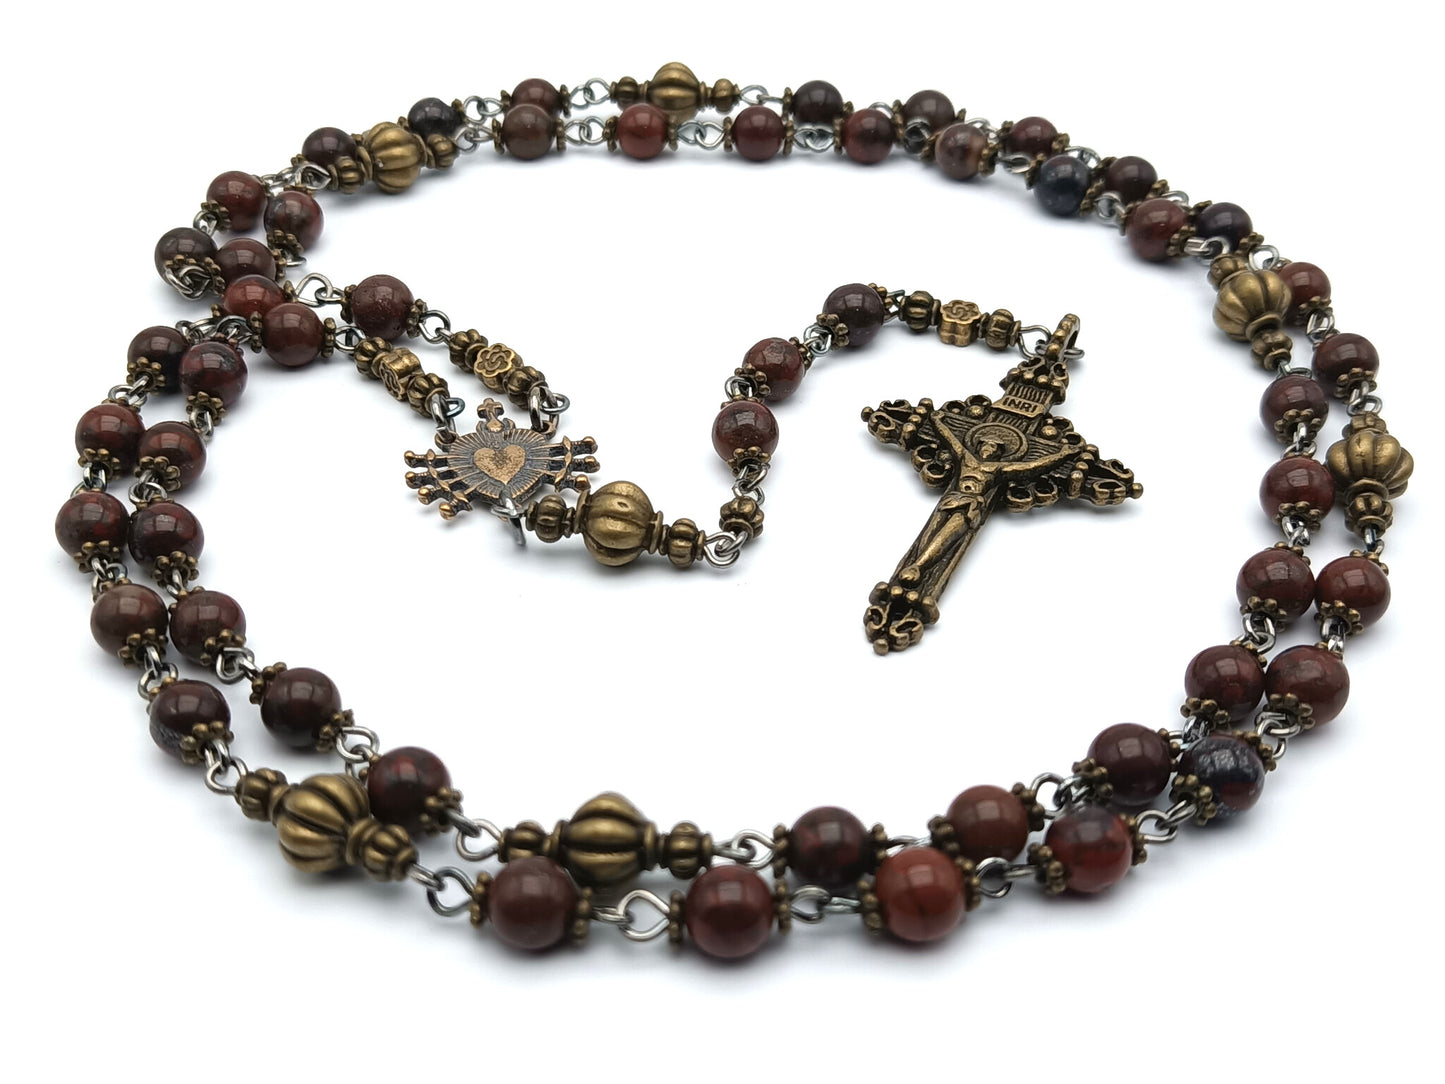 Seven Sorrows unique rosary beads with gemstone beads, bronze crucifix, pater beads and centre medal.